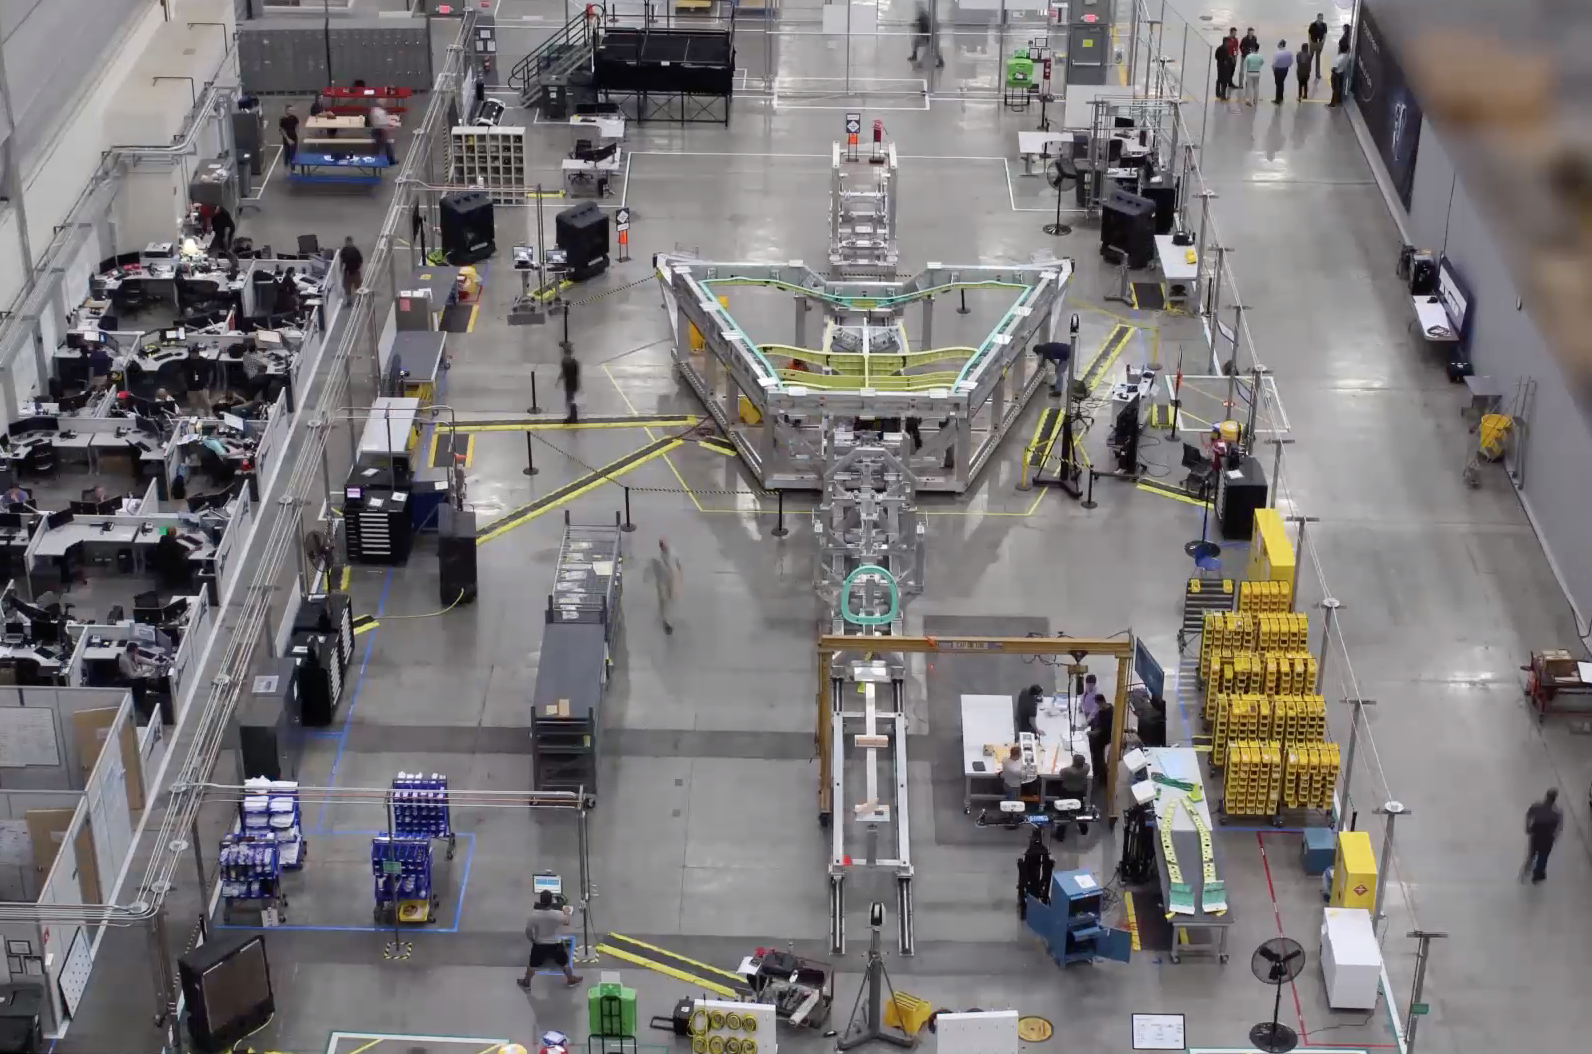 Screen shot from a timelapse video of the X-59 being assembled.